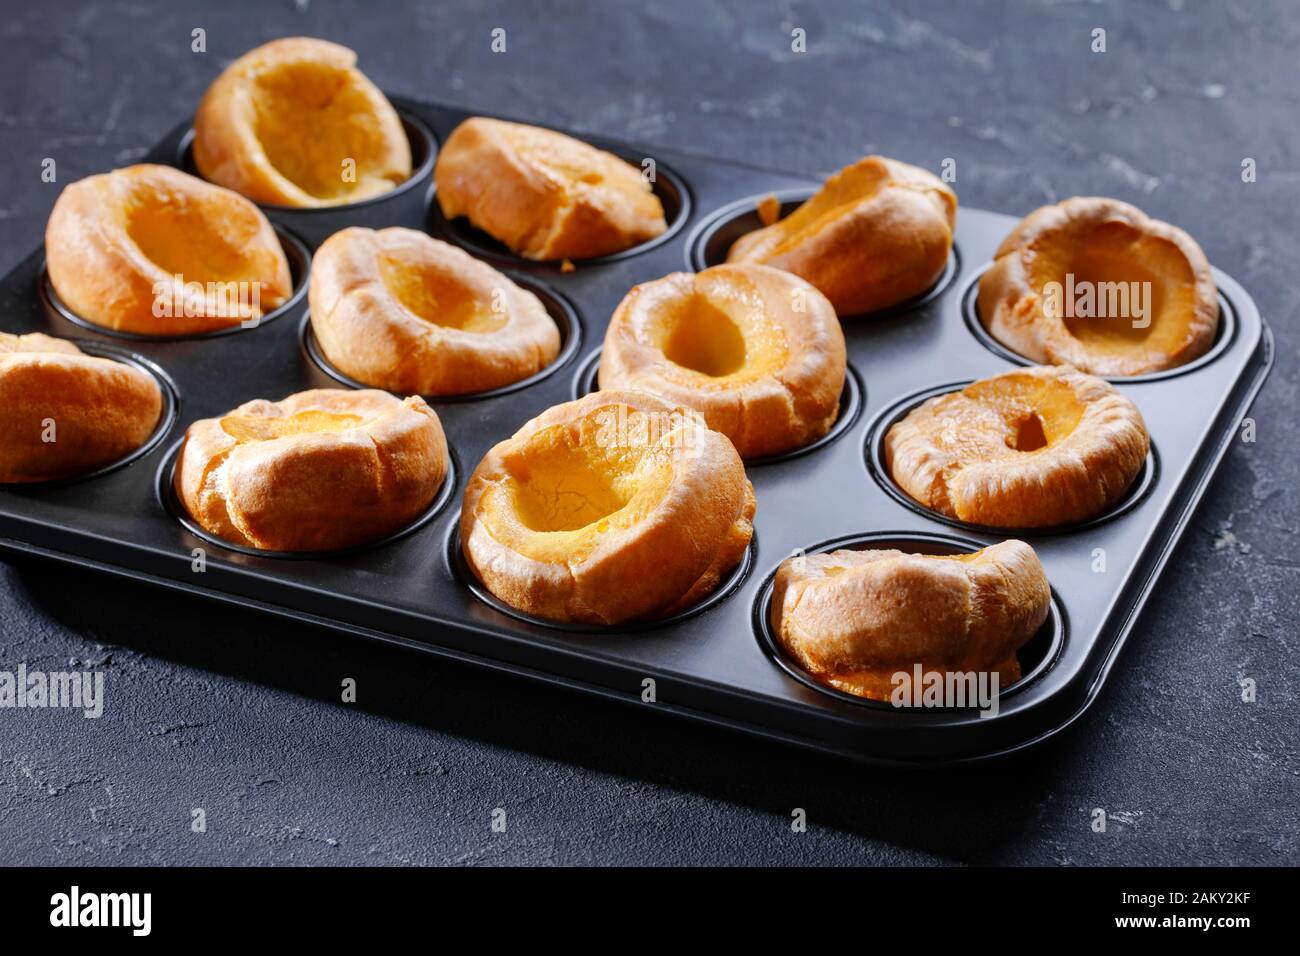 close-up of traditional Yorkshire puddings in a baking tray on a concrete table, english cuisine, view from above Stock Photo